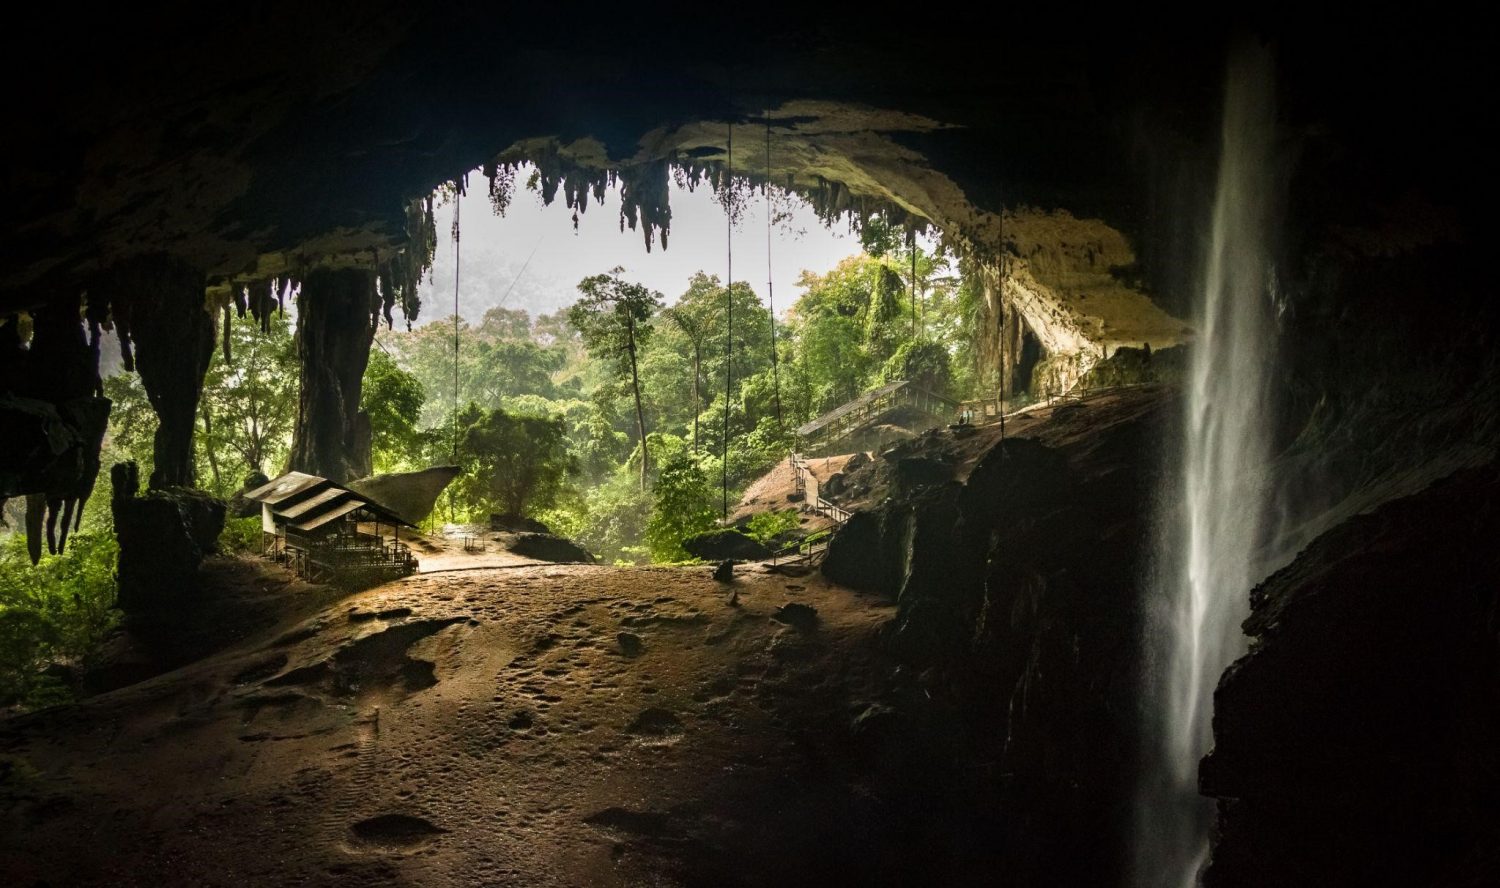 The spectacular scenery from inside Niah Caves.